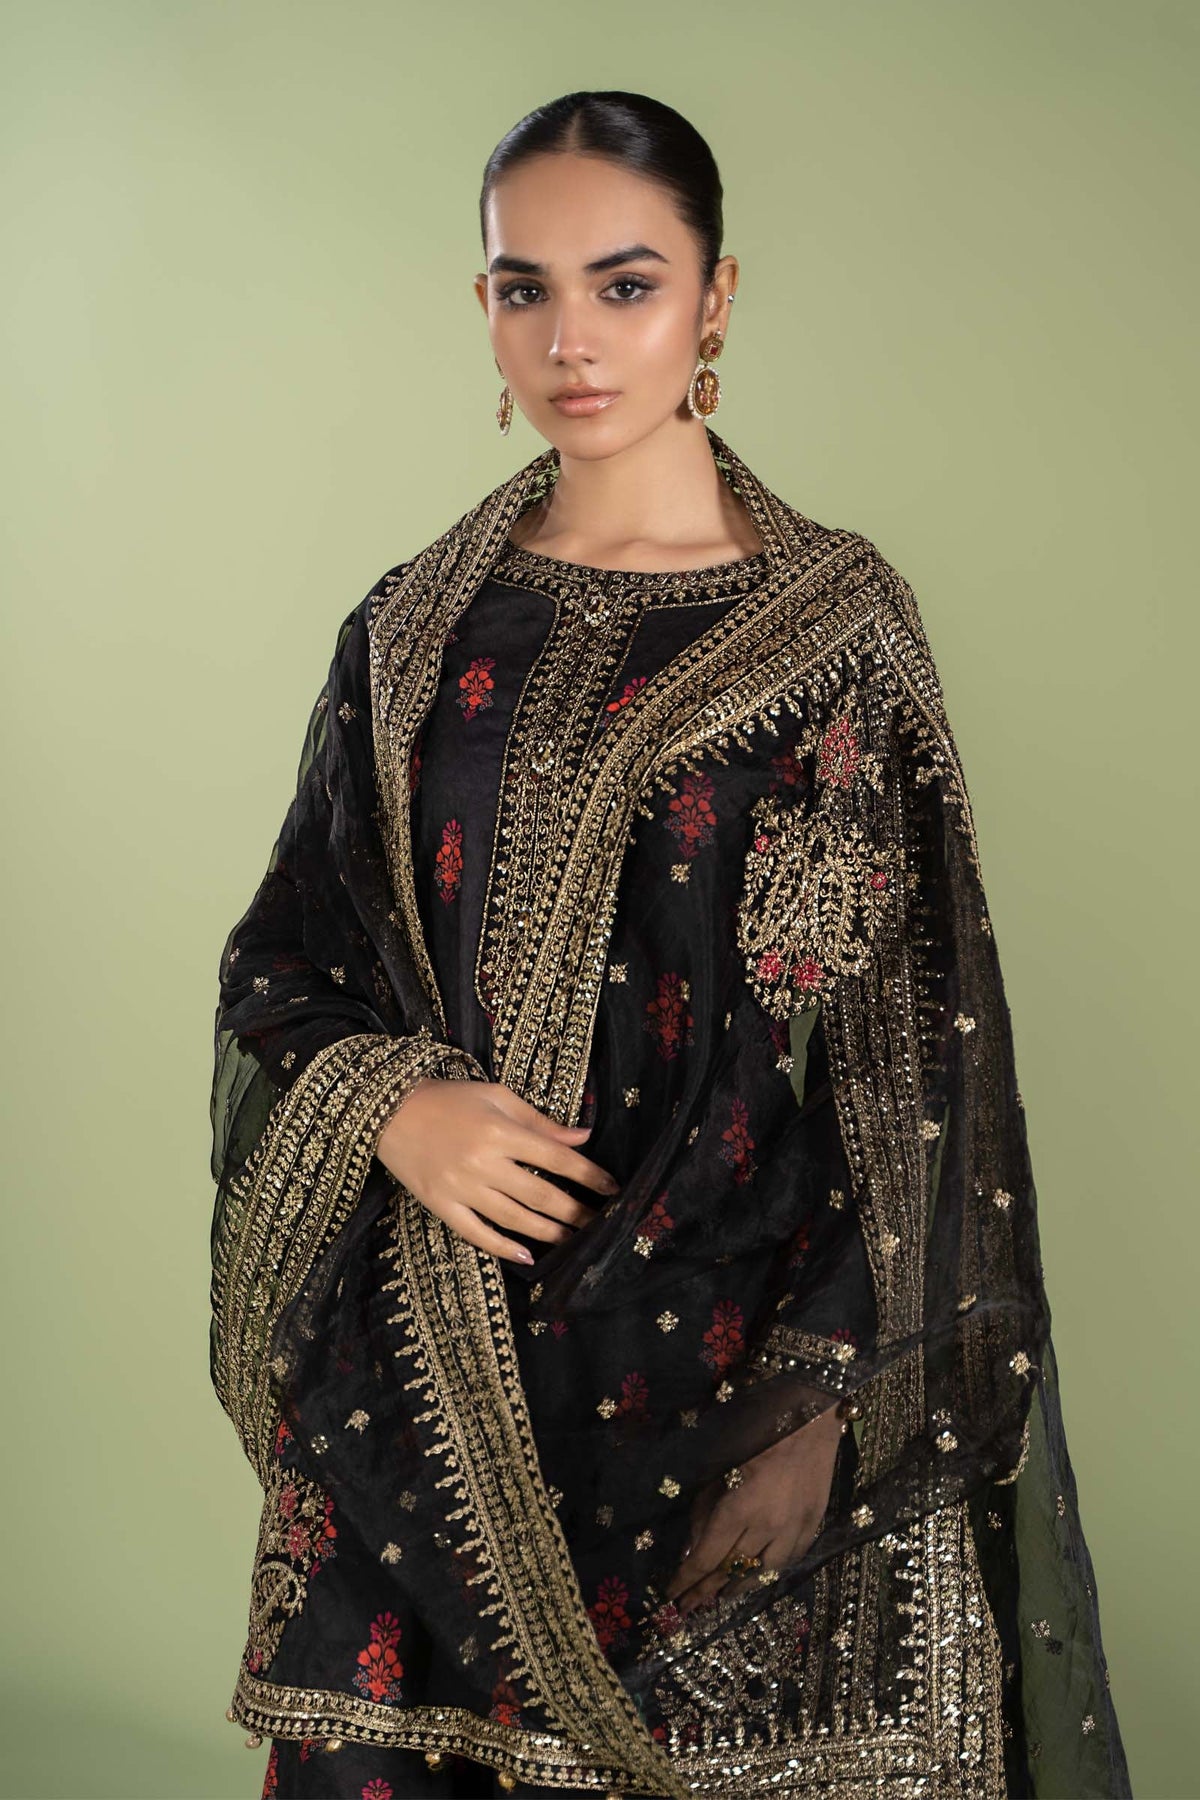 3 PIECE EMBROIDERED LAWN SUIT | DW-EF24-77 – Maria.B. Designs (AE)